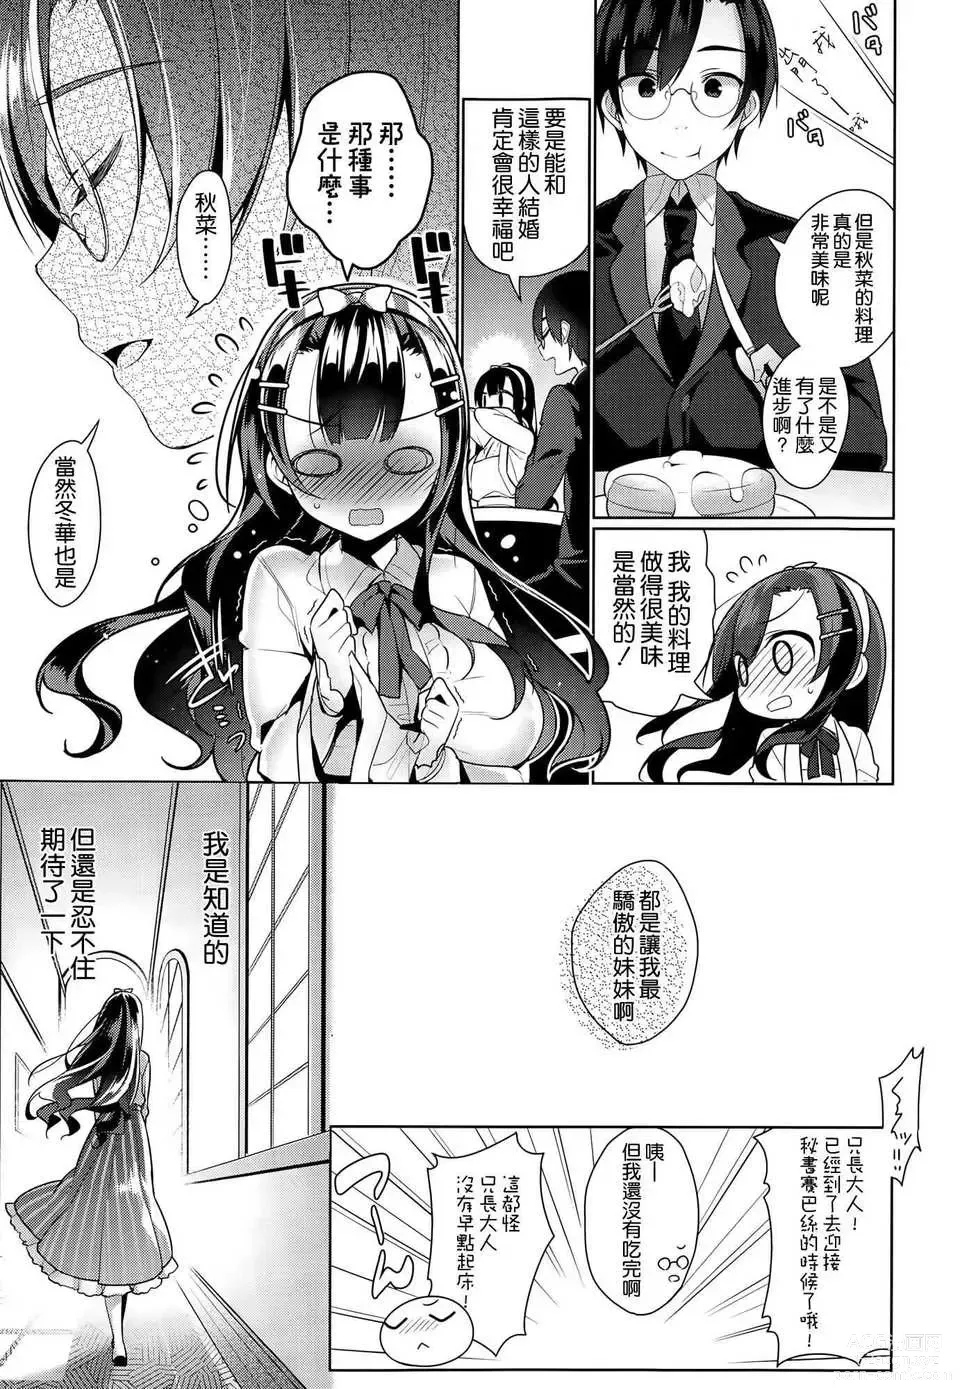 Page 7 of manga Aki na Dere - Mysterious the forbidden carnal relationship